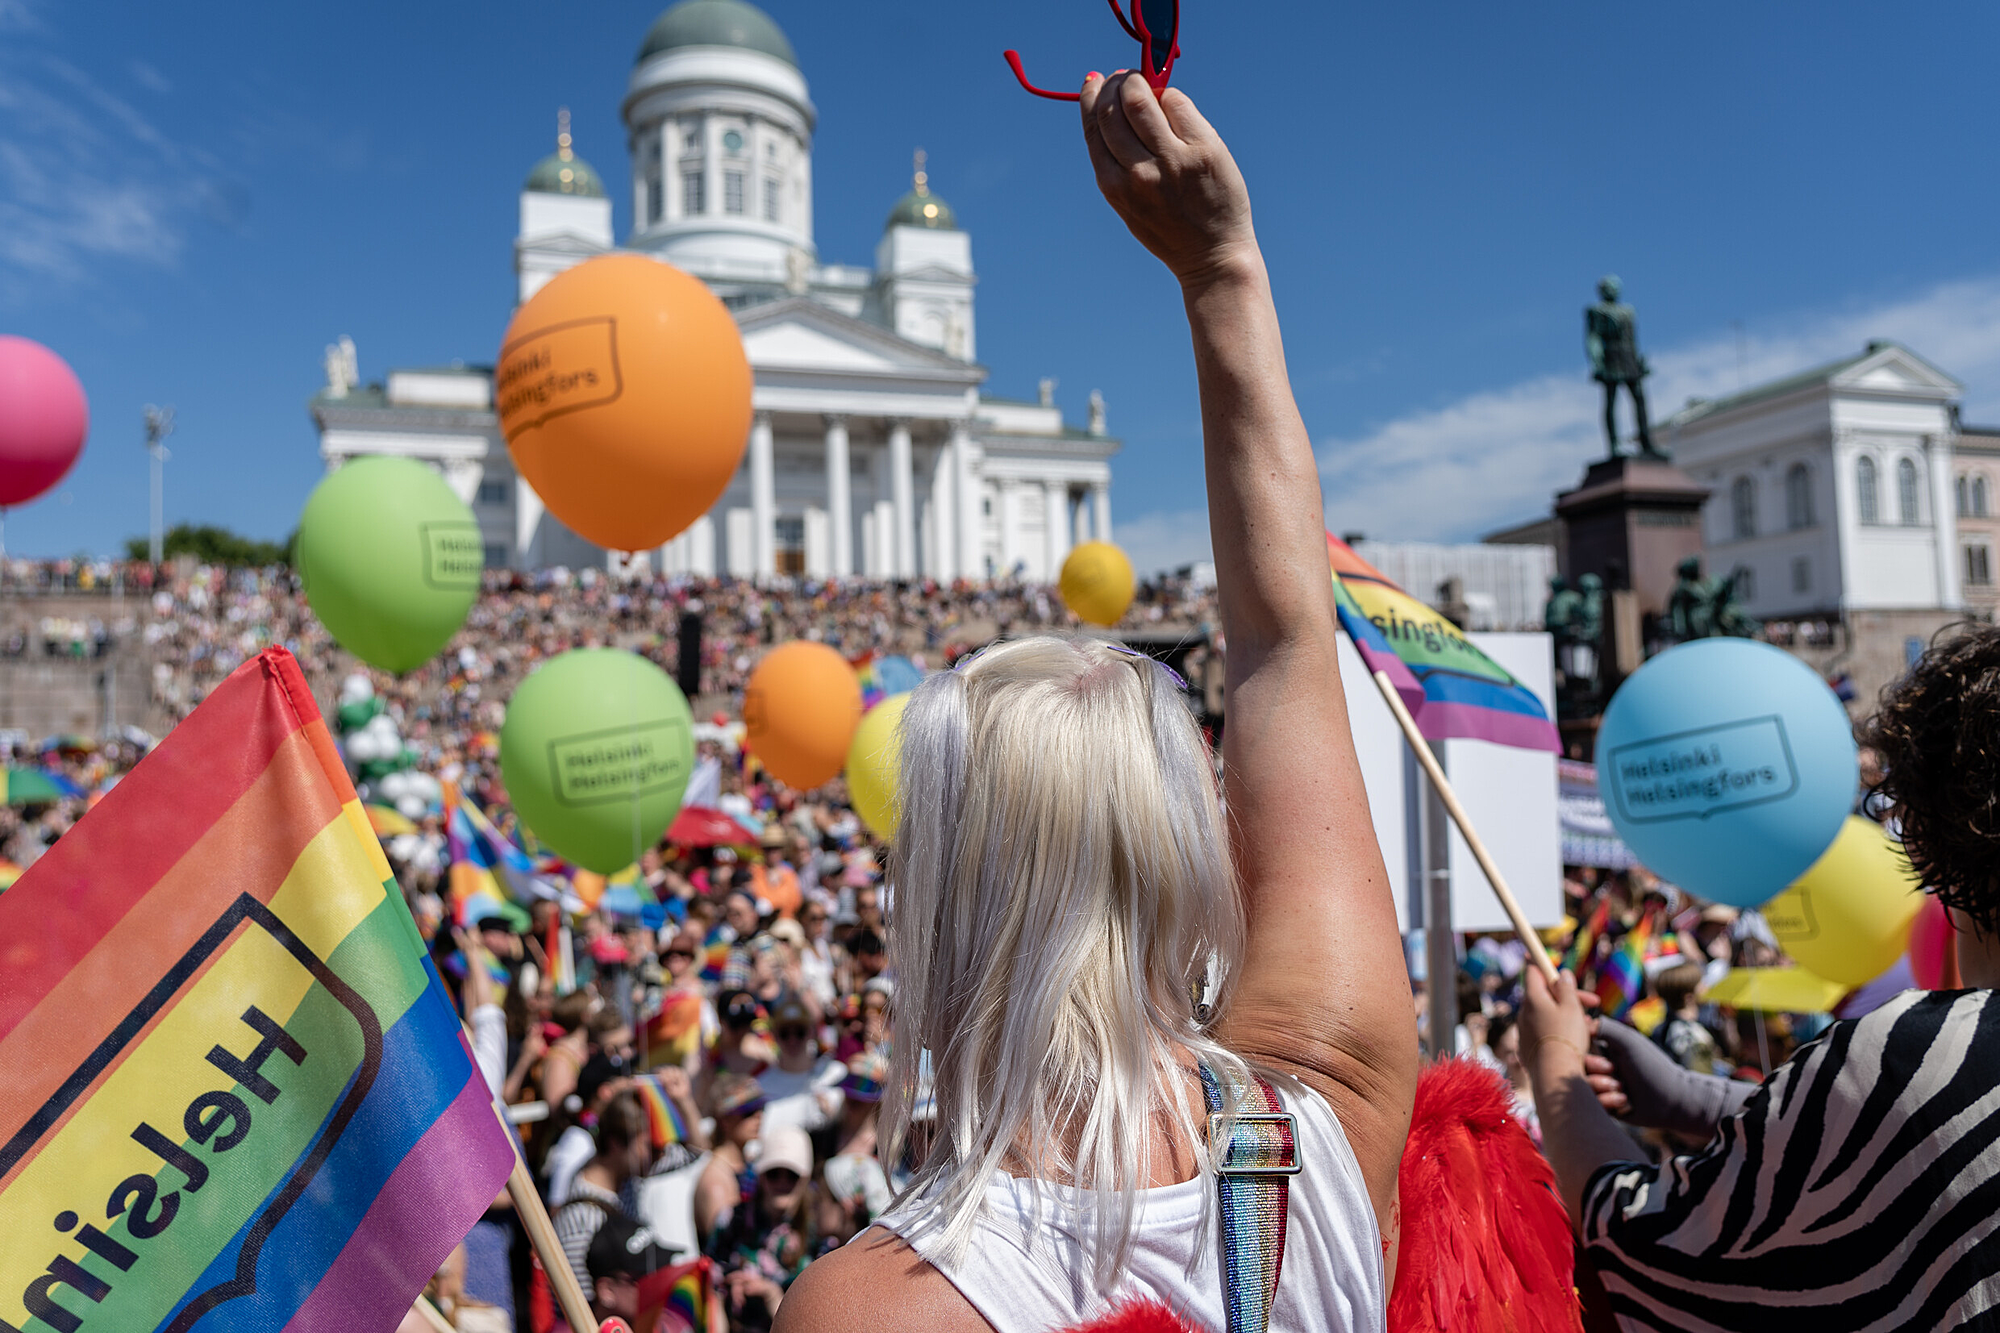 Rainbows in the North: Helsinki's Embrace of Love, Light, and Liberty